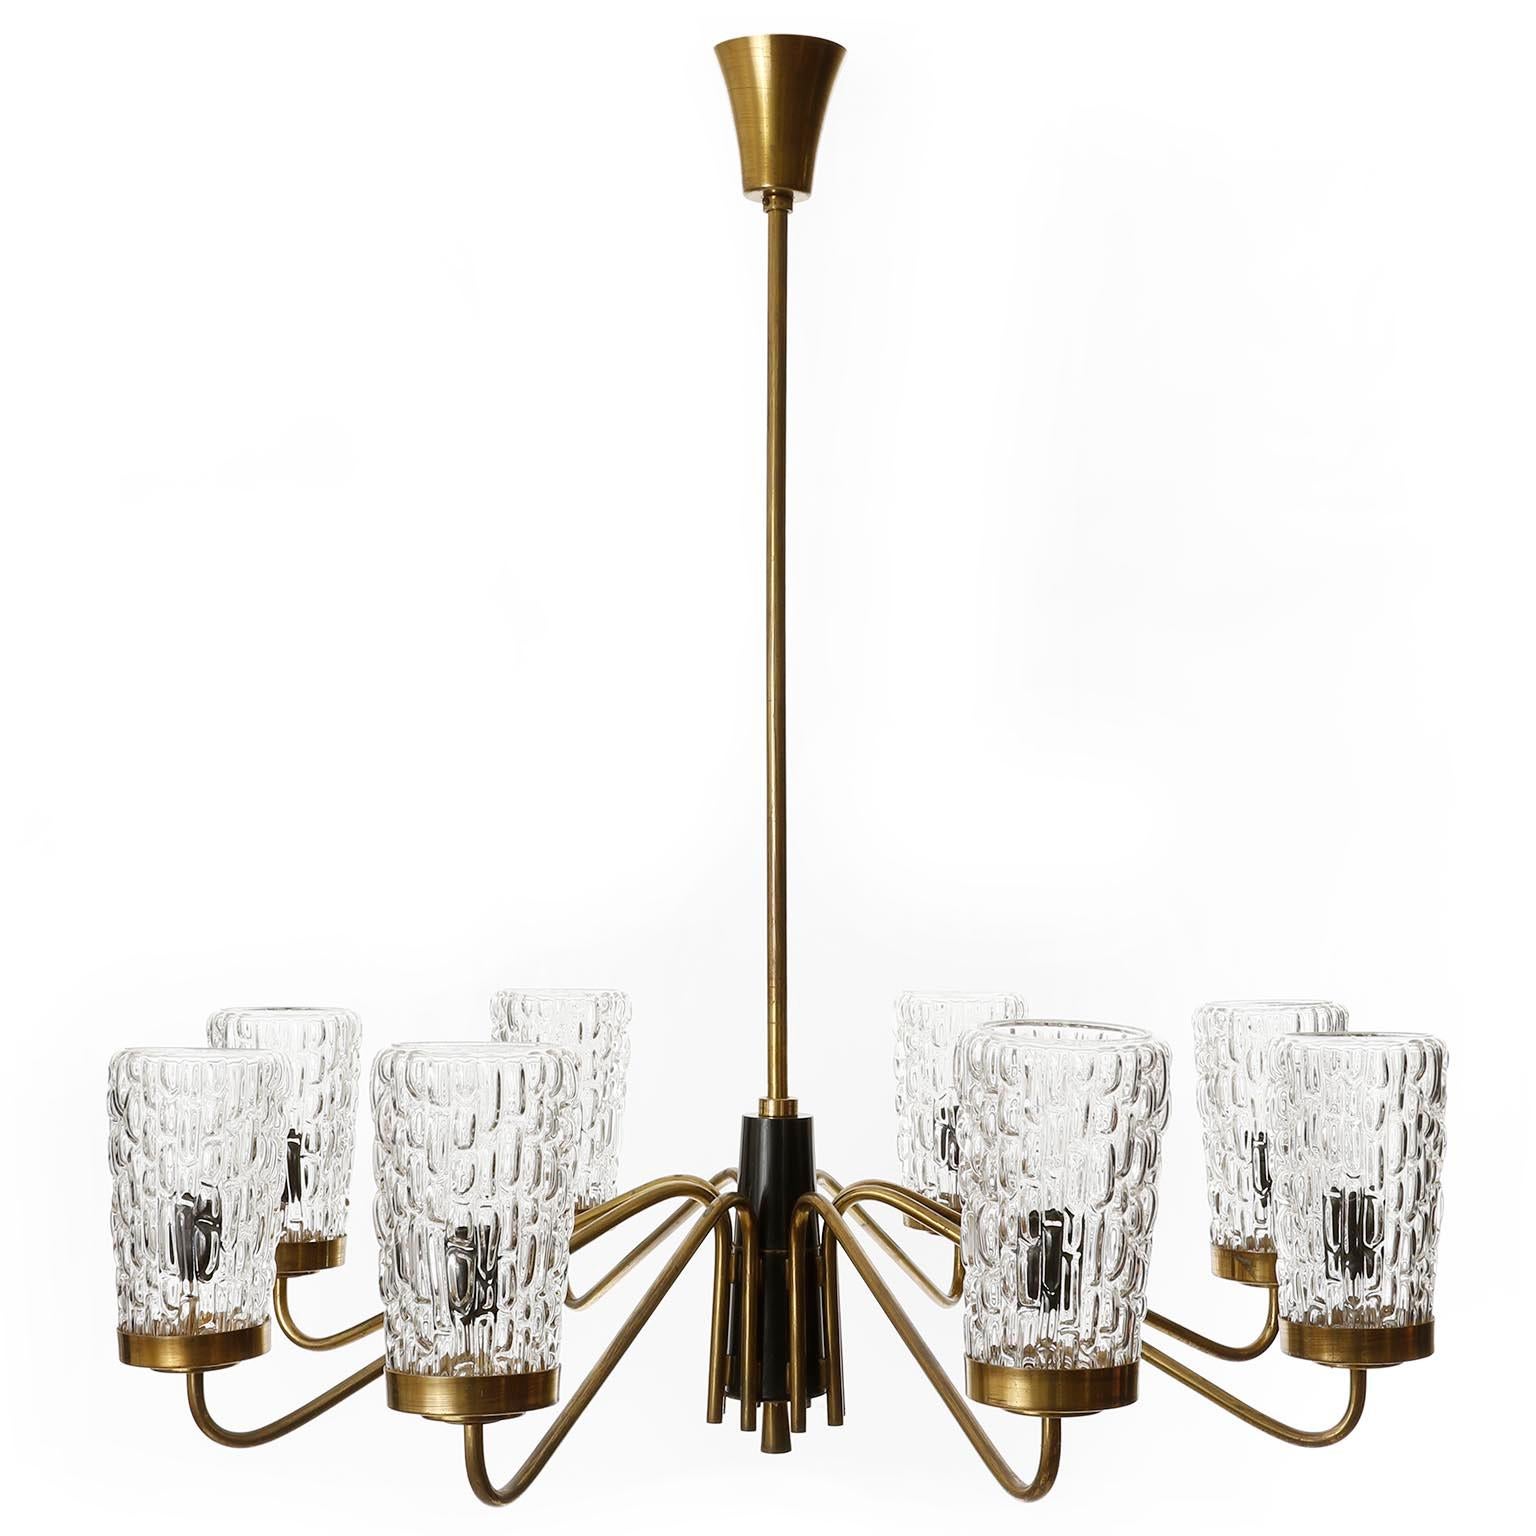 An extra large eight-arm chandelier by Rupert Nikoll, Vienna, manufacured in Mid-Century, circa 1960 (late 1950s or early 1960s). 
The fixture is made of a nice mixture of materials: large textured clear glass lamp shades, patinated brass and black